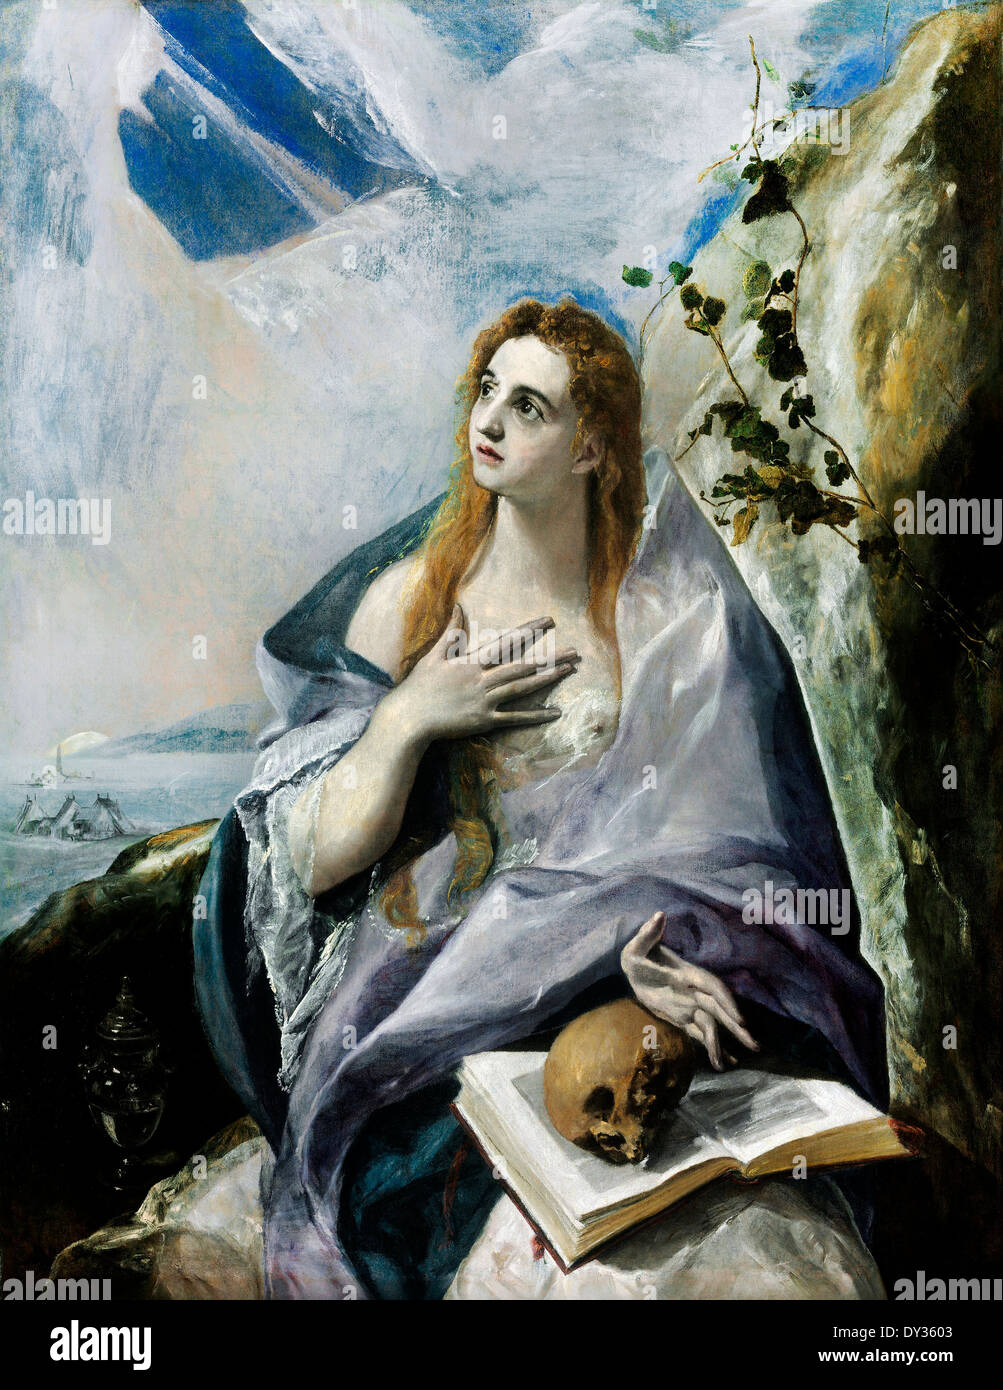 El Greco, The Penitent Magdalene 1576-1577 Oil on canvas. Museum of Fine Arts, Budapest, Hungary. Stock Photo